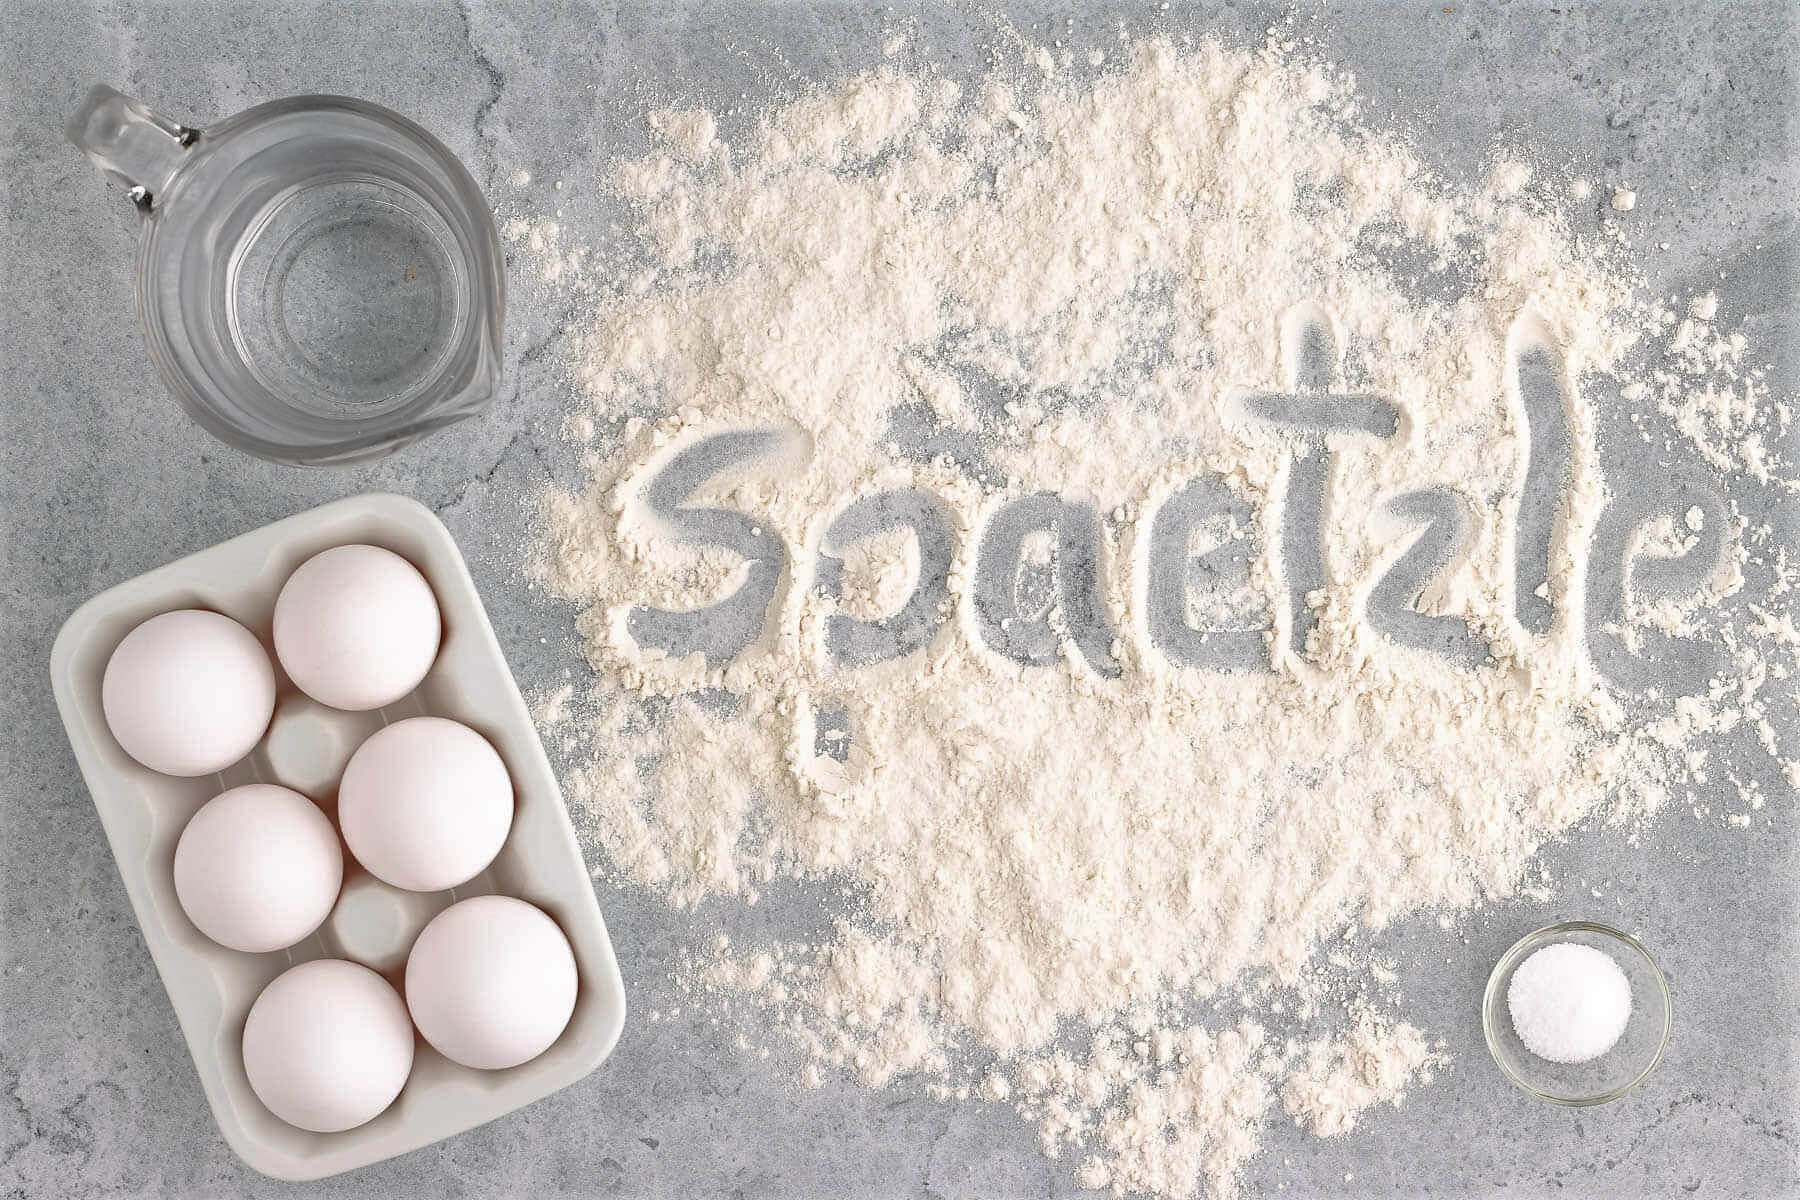 Spilled flour with the word 'spaetzle' written into it. Eggs, salt, and water nearby.